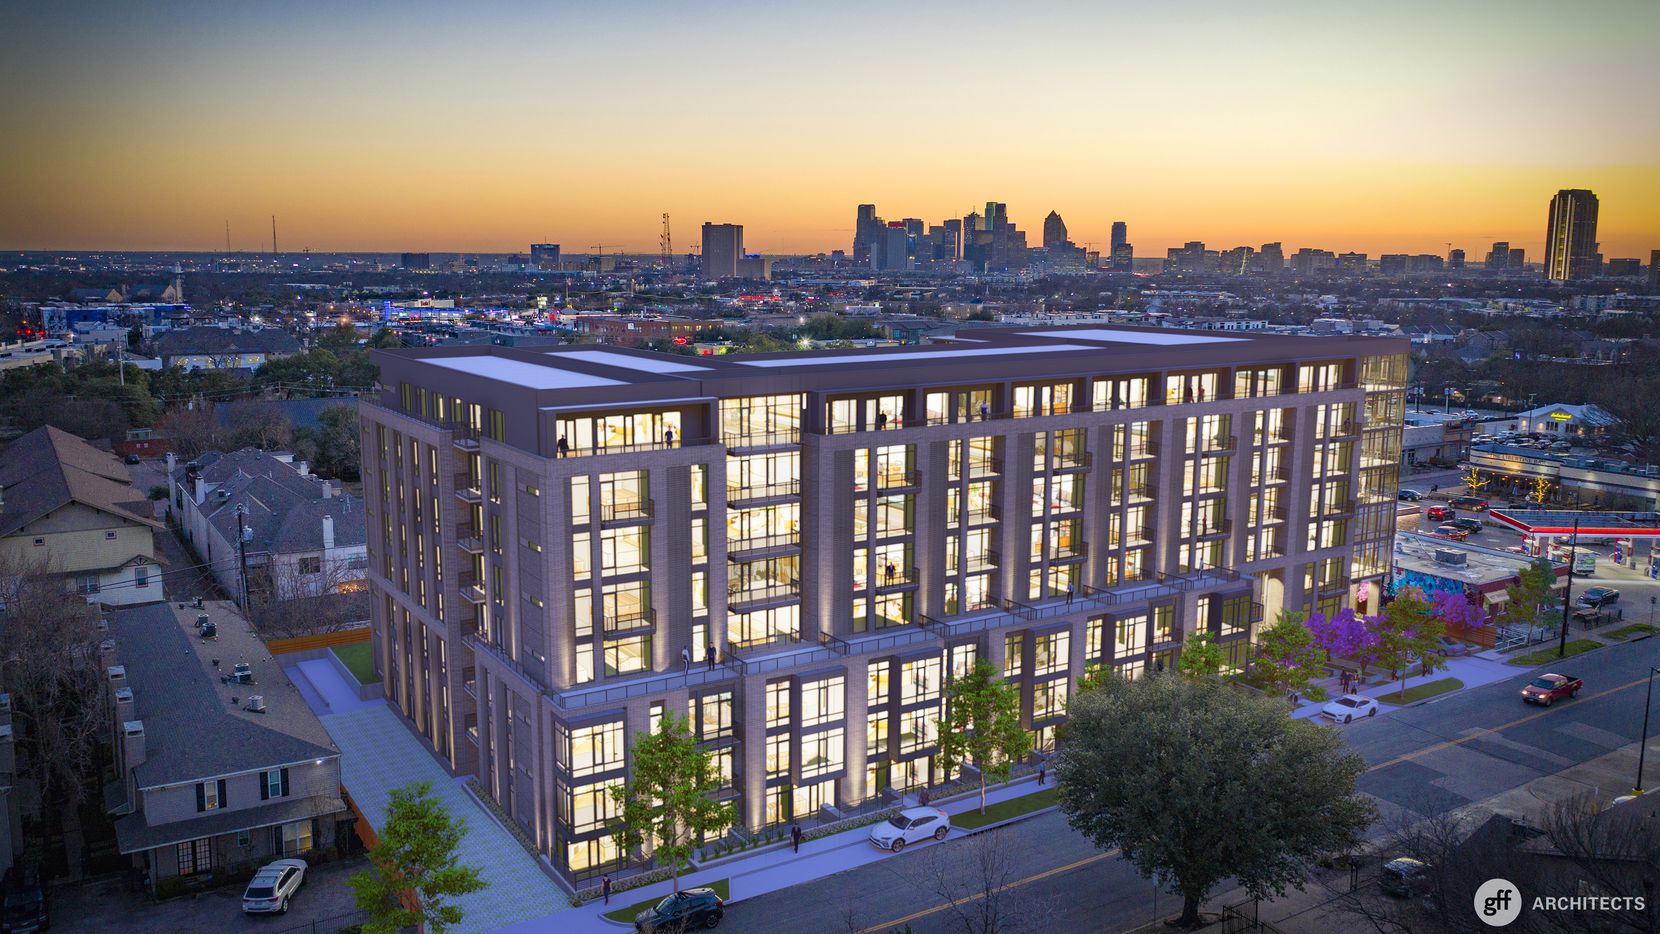 New rental project off Greenville Avenue will have more than 230 apartments.